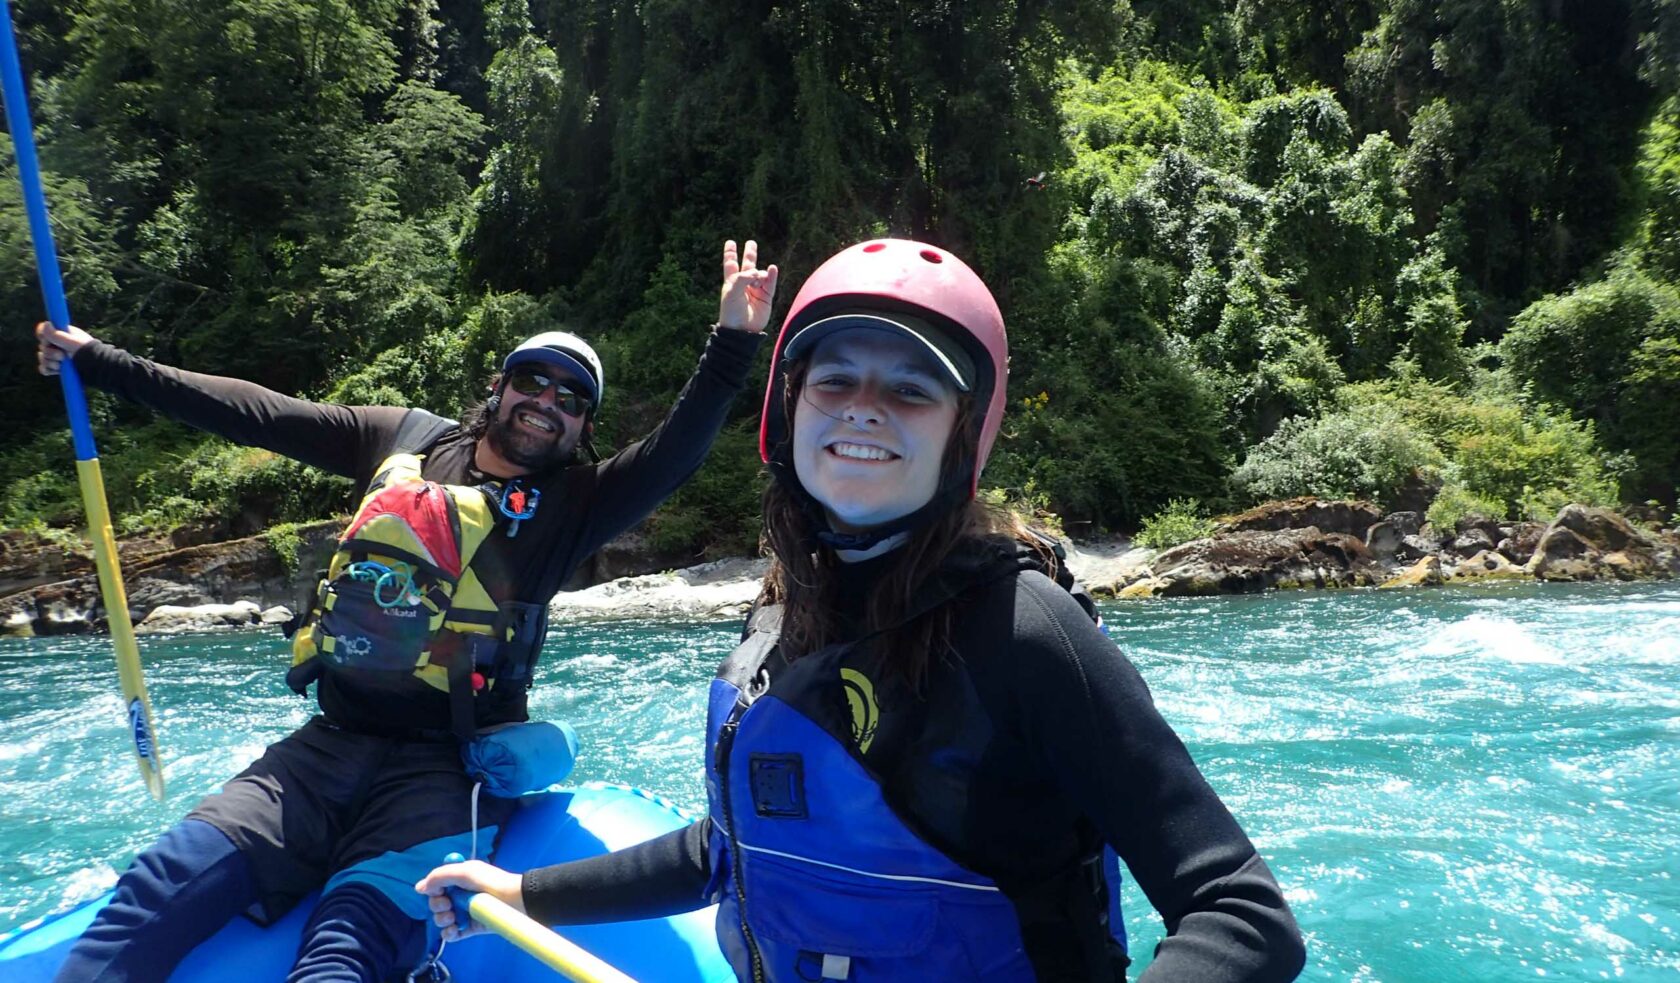 Two people smiling on a whitewater raft.